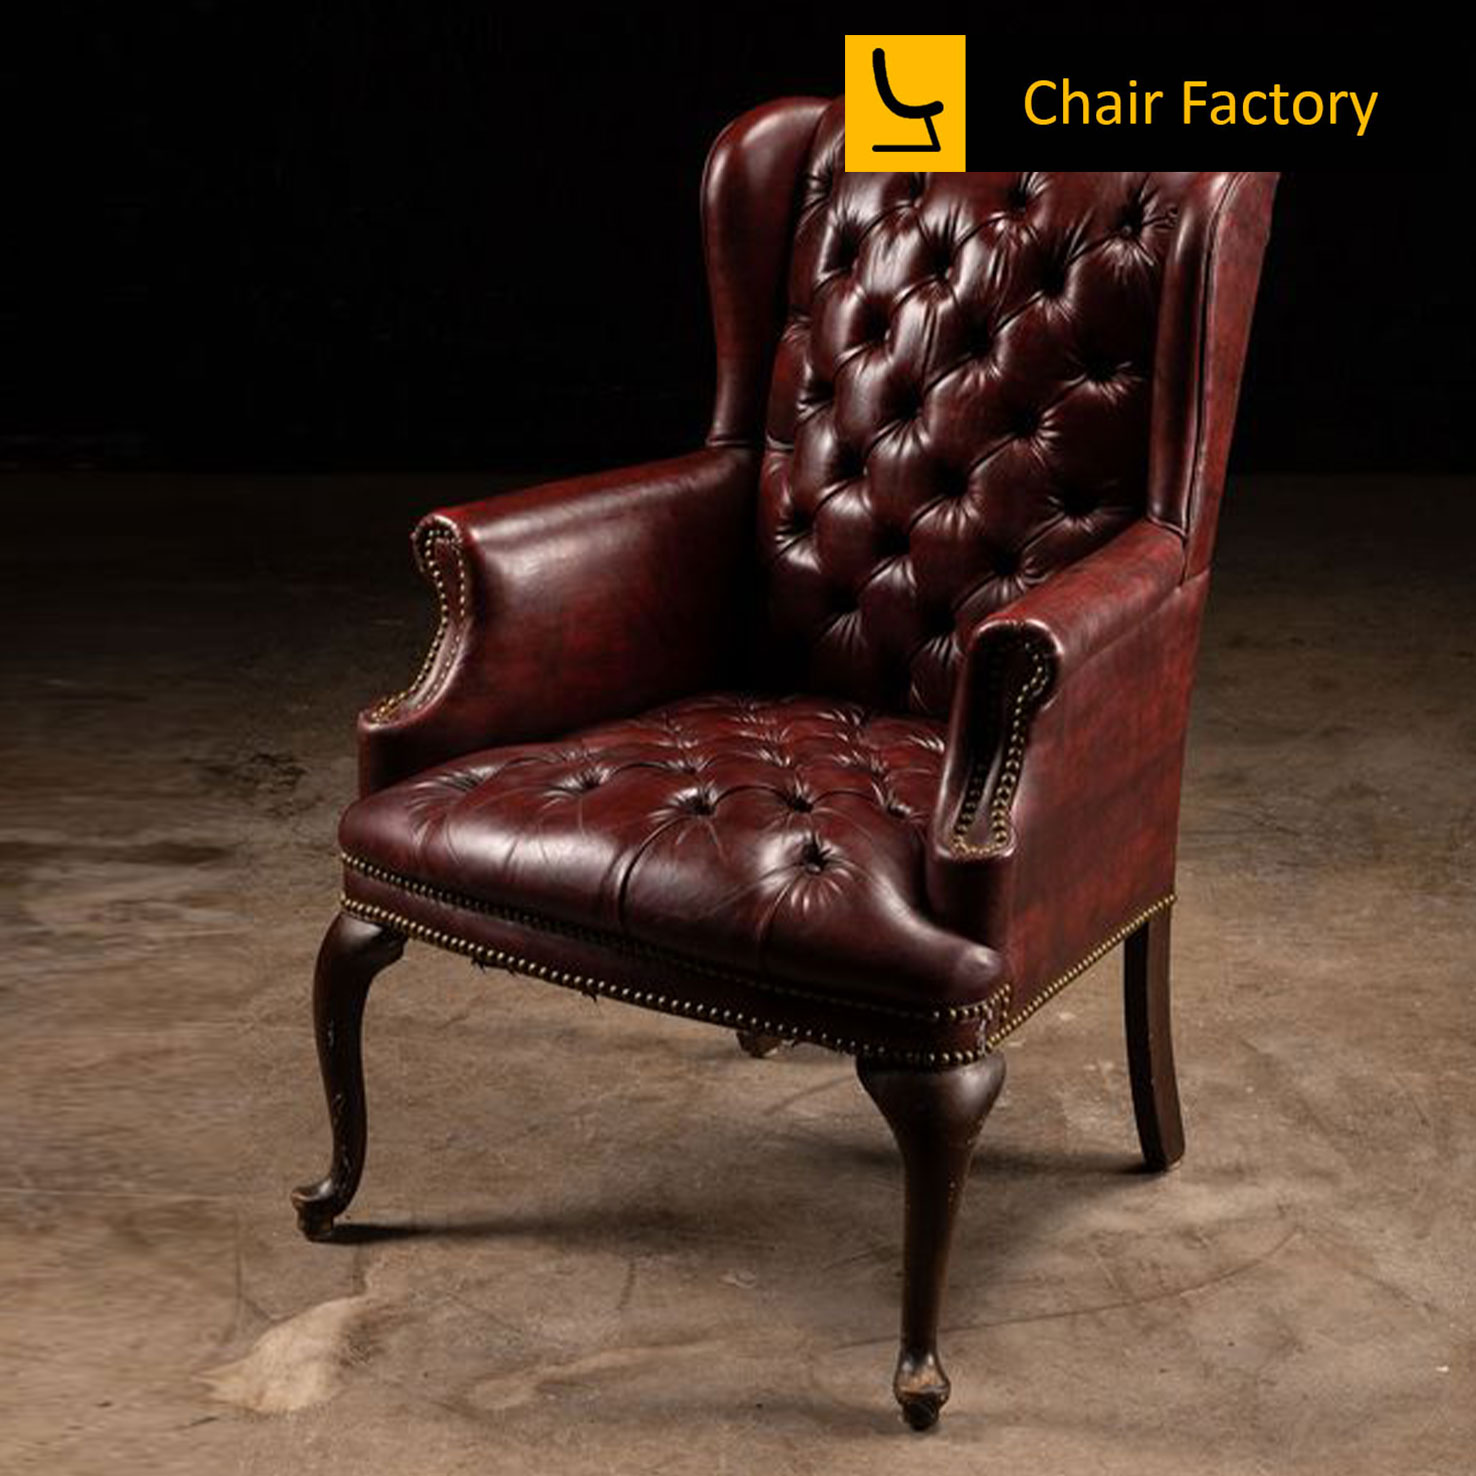 COMBERTOR GENUINE LEATHER ARM CHAIR